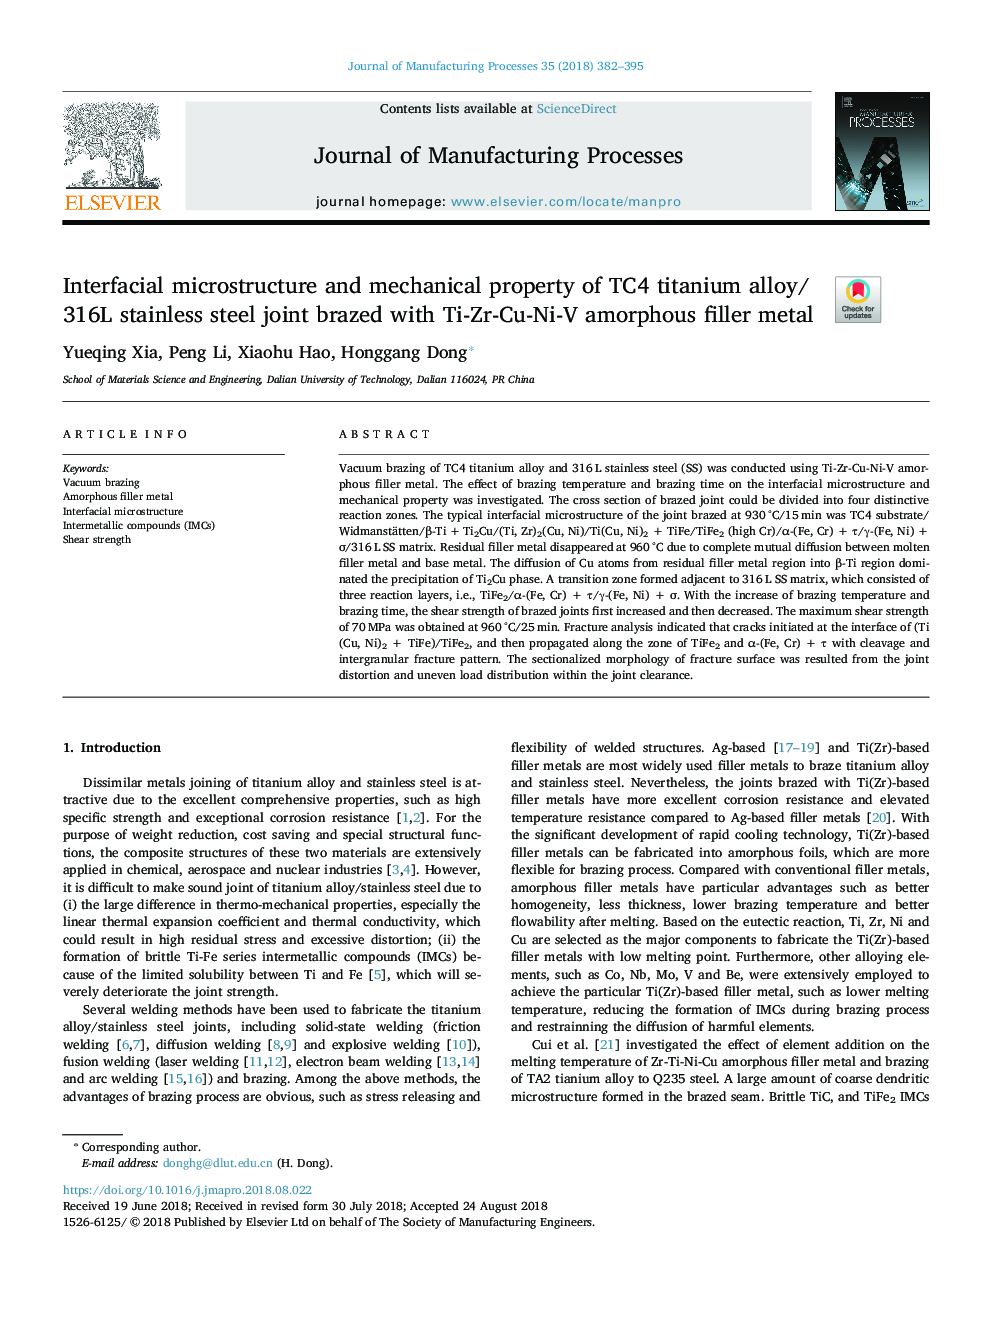 Interfacial microstructure and mechanical property of TC4 titanium alloy/316L stainless steel joint brazed with Ti-Zr-Cu-Ni-V amorphous filler metal